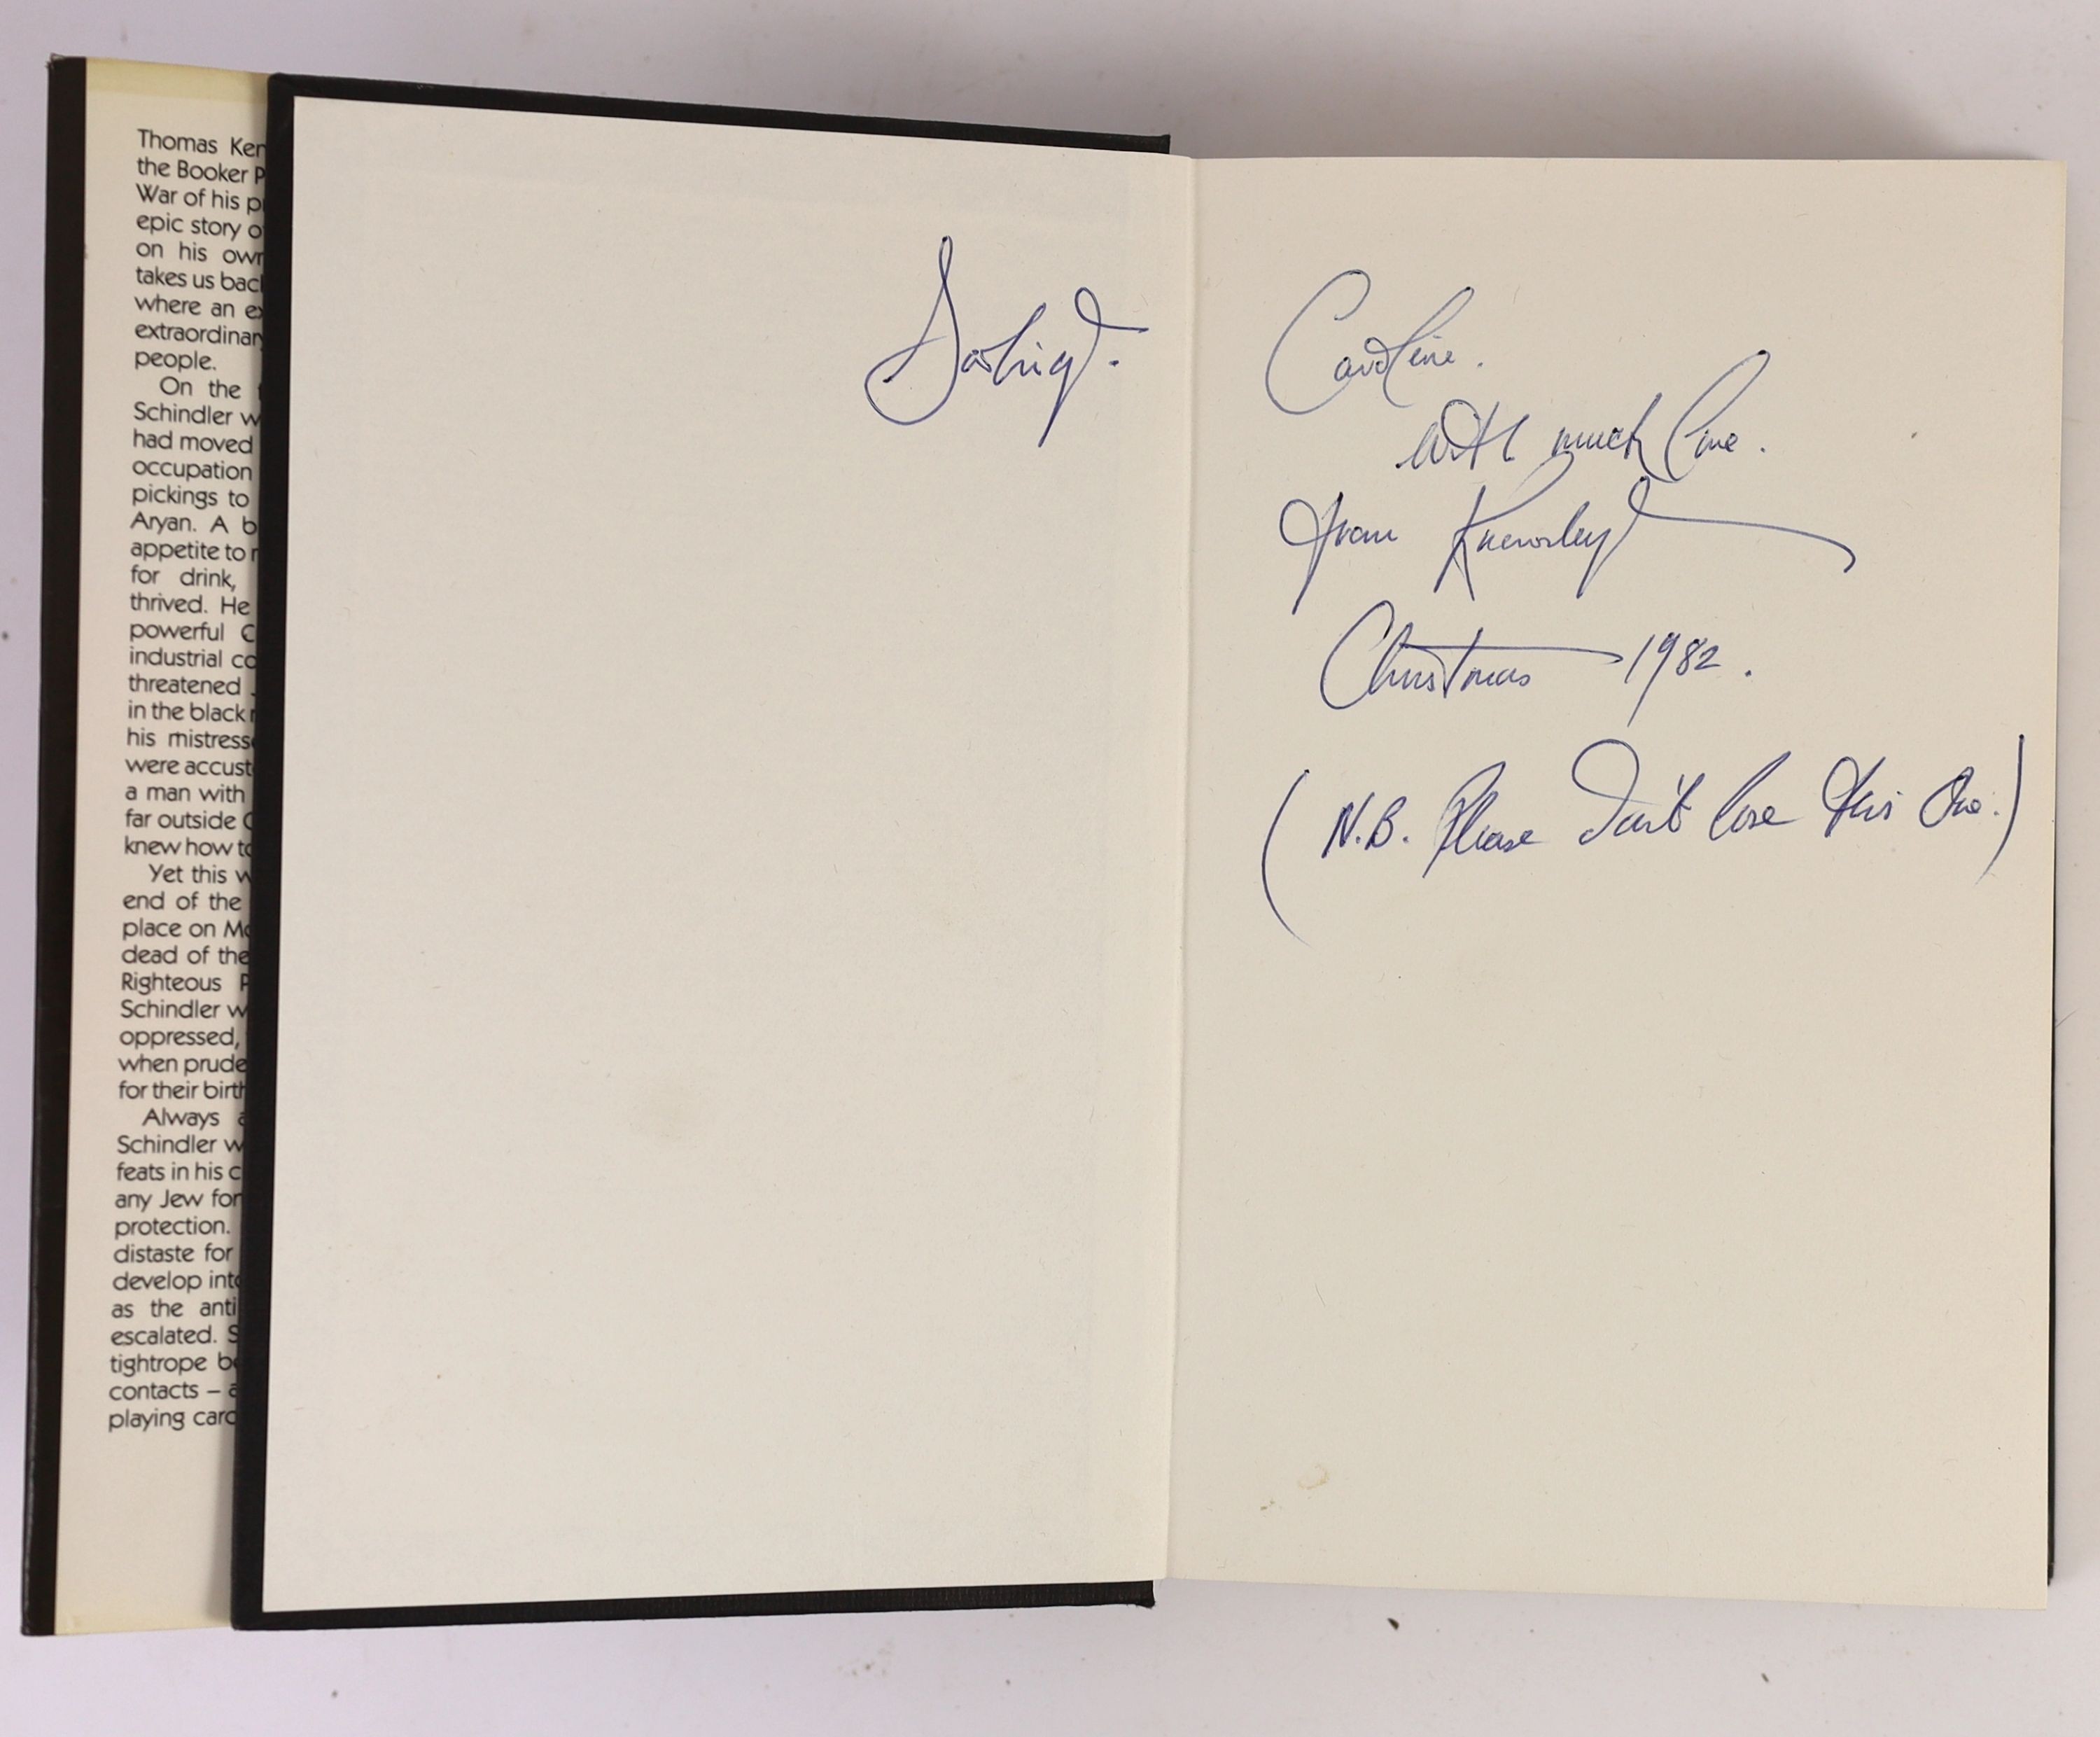 Keneally, Thomas- Schindler’s Ark, 1st edition, 2nd impression, 8vo, cloth, with unclipped d/j, inscribed - ‘’Darling Caroline, with love from Keneally, Christmas 1982 (N.B. Please don’t lose this one)’’, Hodder & Stough